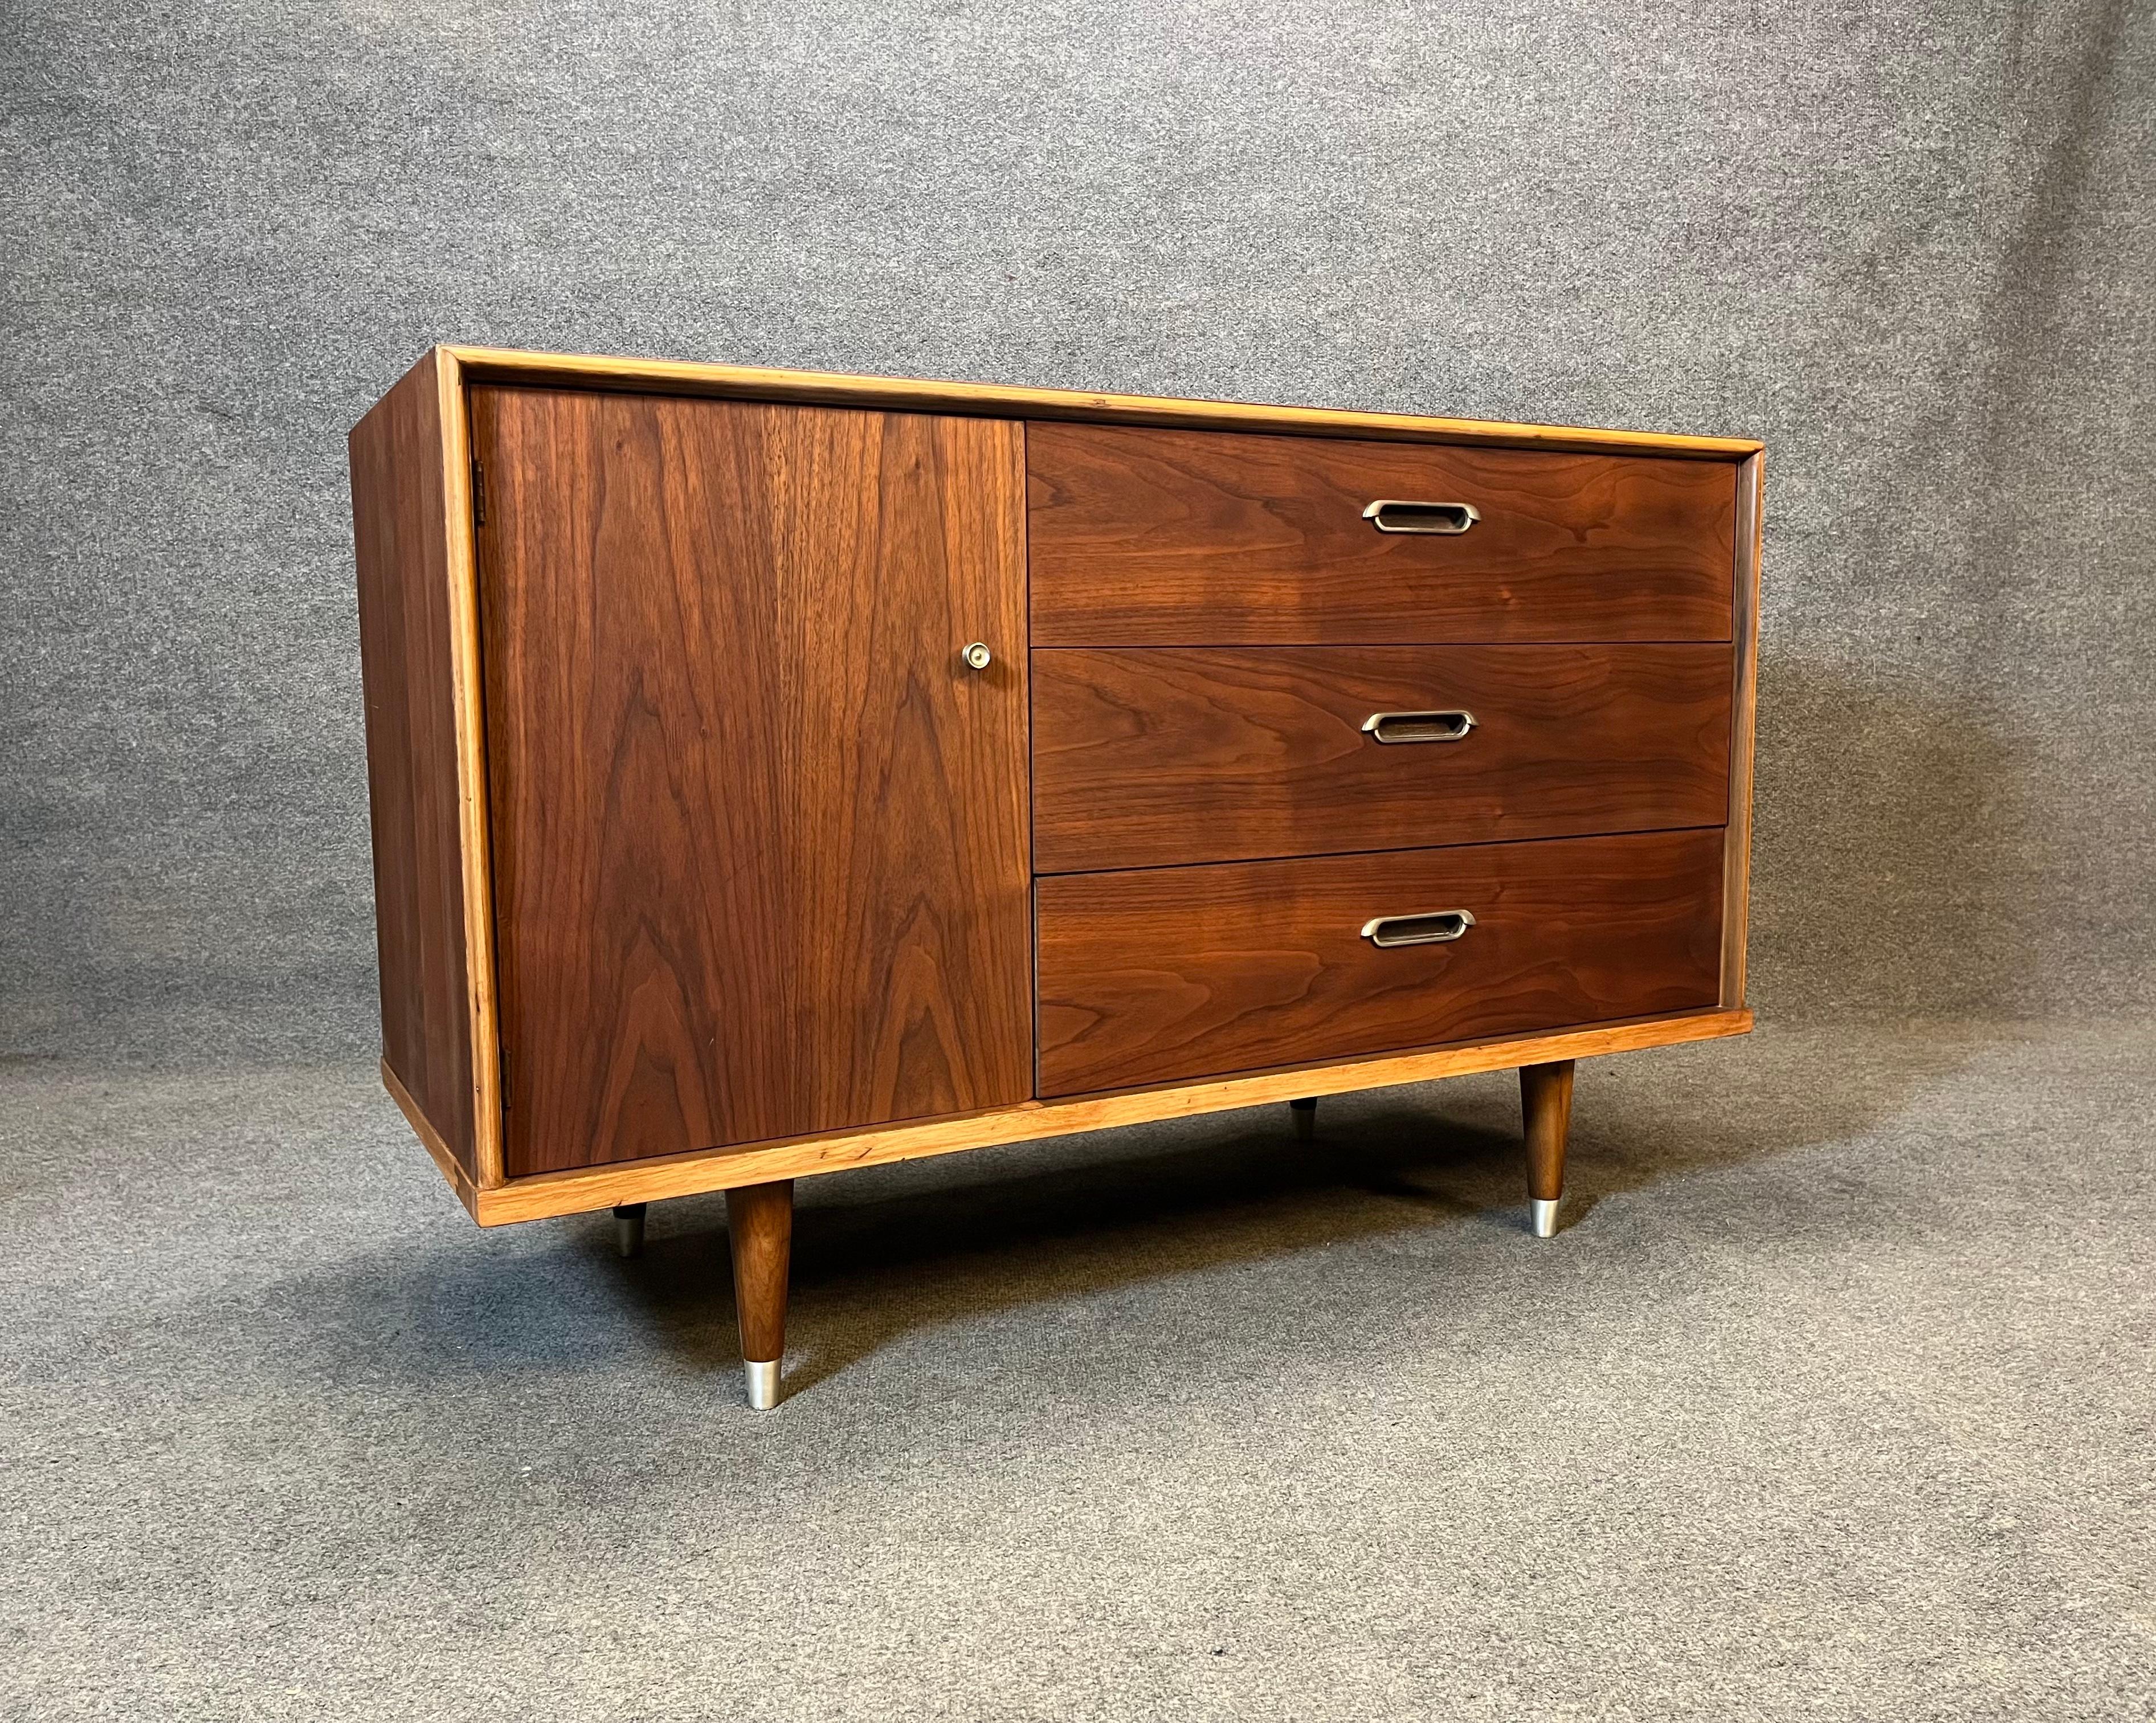 For sale is a vintage credenza by BP John circa 1963 in walnut. Credenza features three drawers and one cabinet. Piece has been completely refinished, hardware has been polished. This piece would make a great entryway piece, small record cabinet or